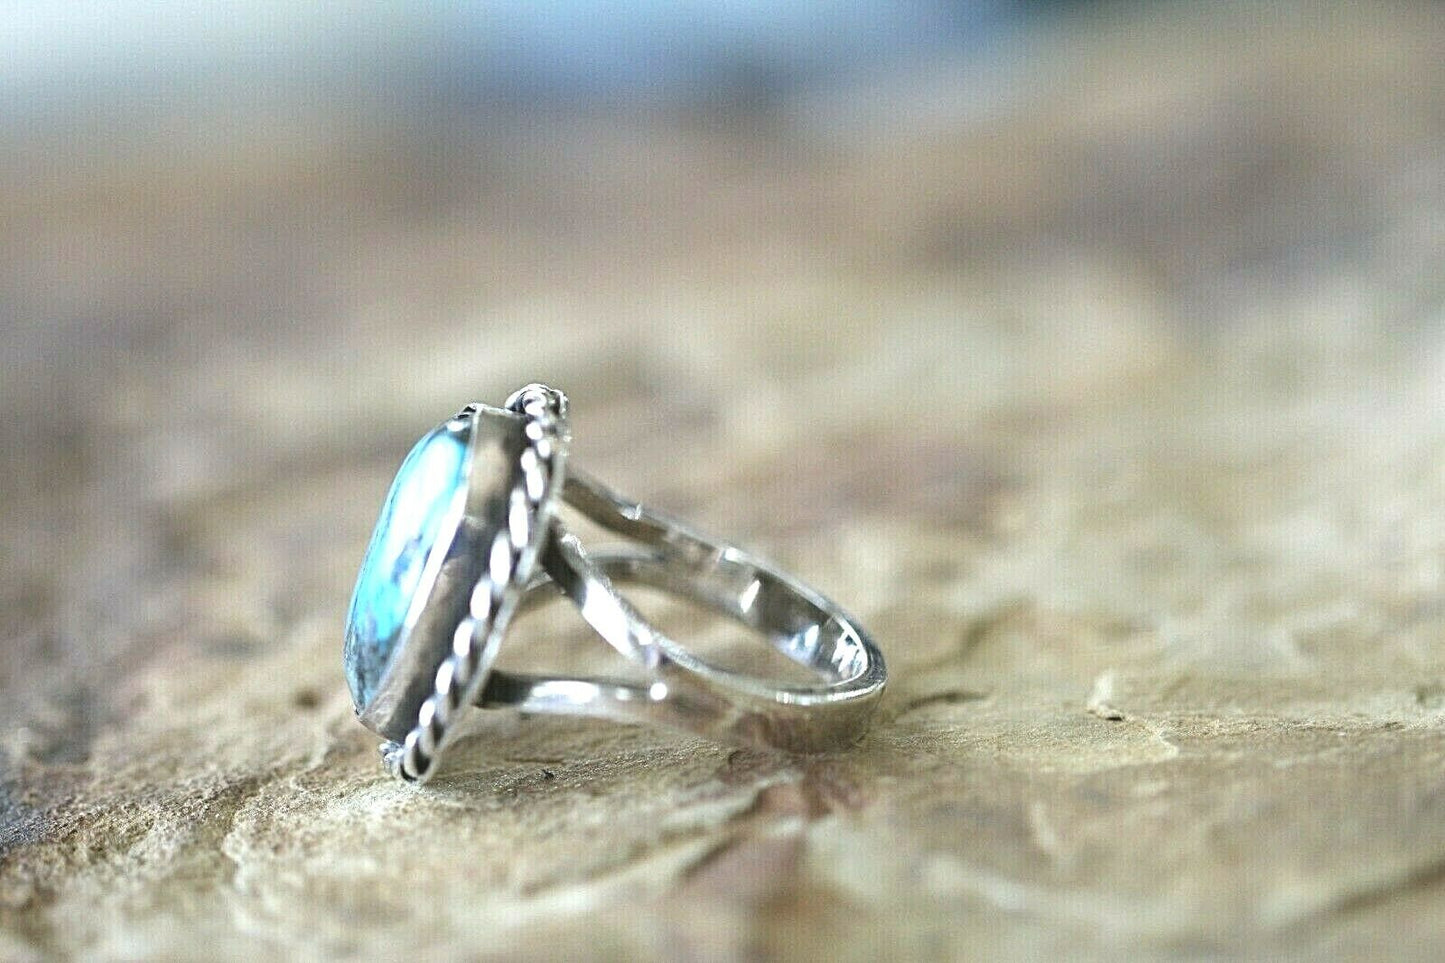 *VINTAGE*  Large Native American Sterling Silver Blue Turquoise Ring  Size 13.5